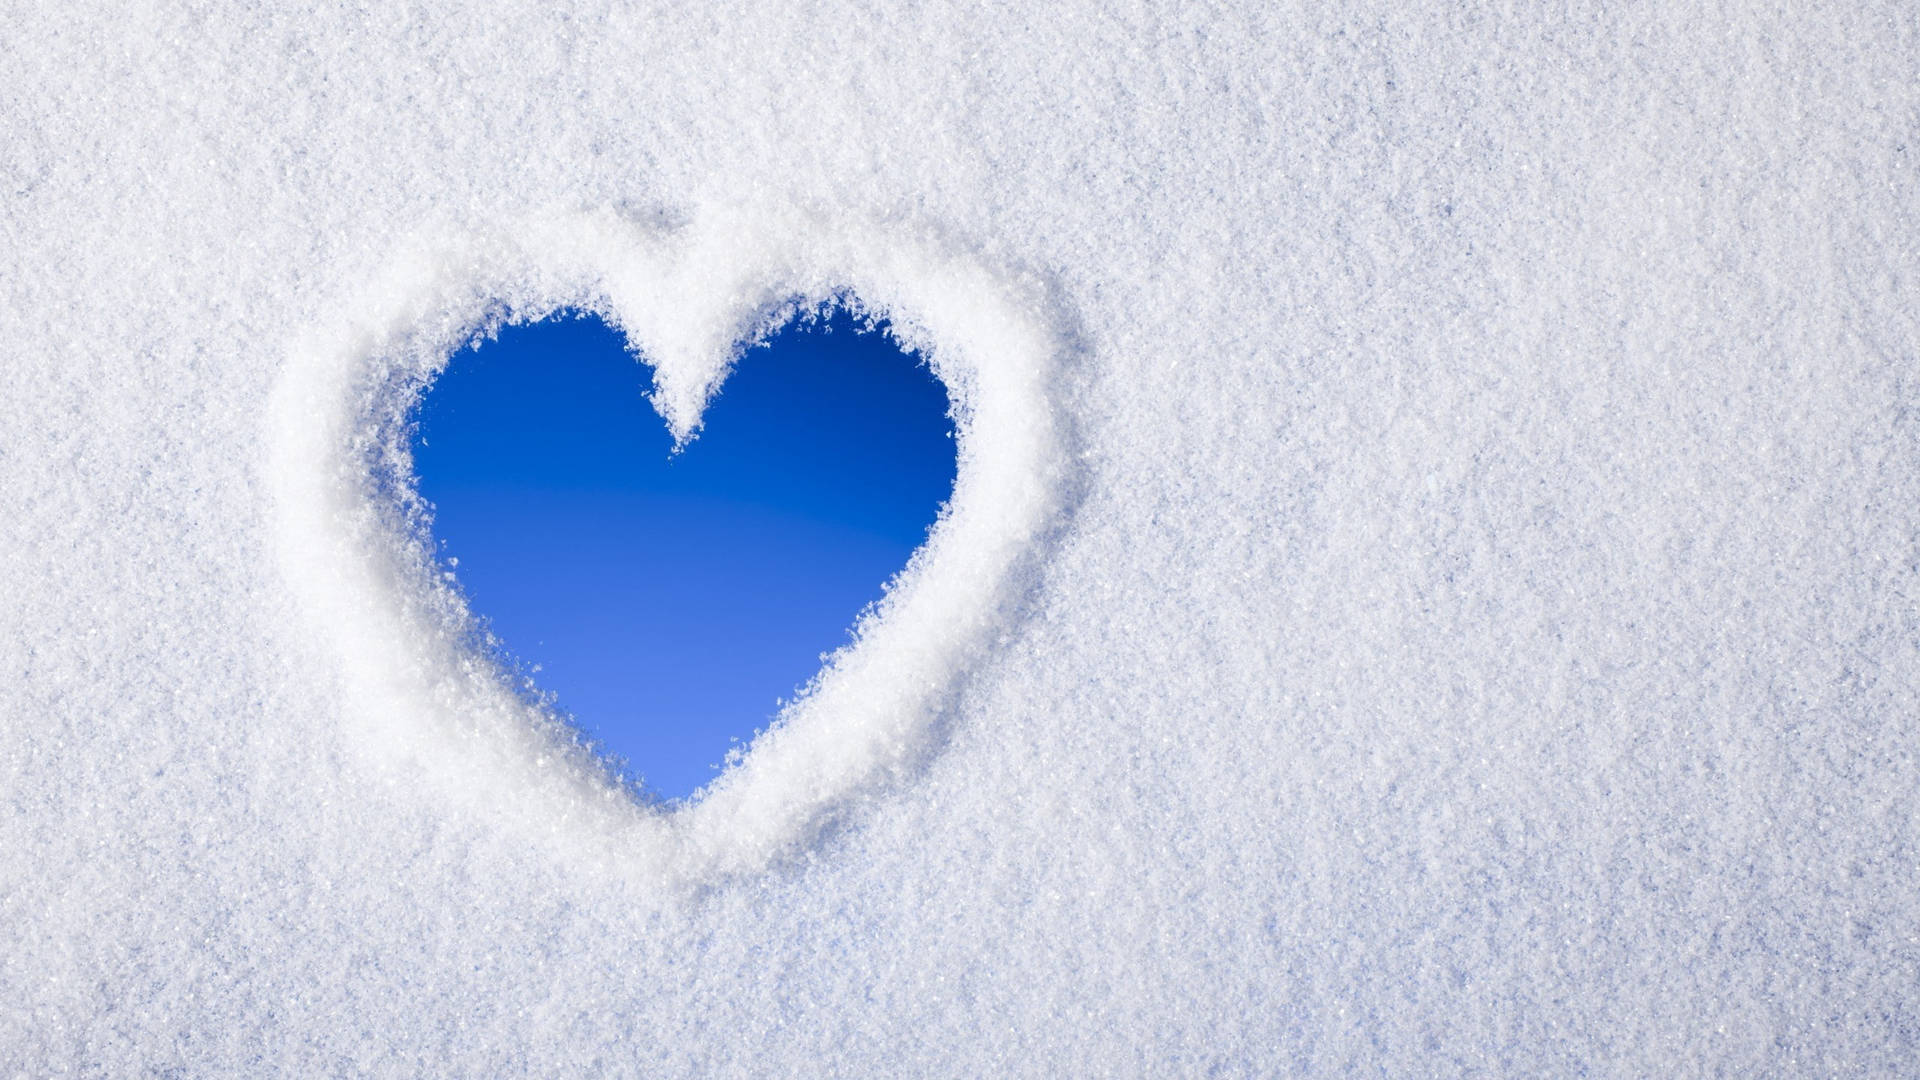 Frozen heart wallpaper by ViBy87  Download on ZEDGE  93c5